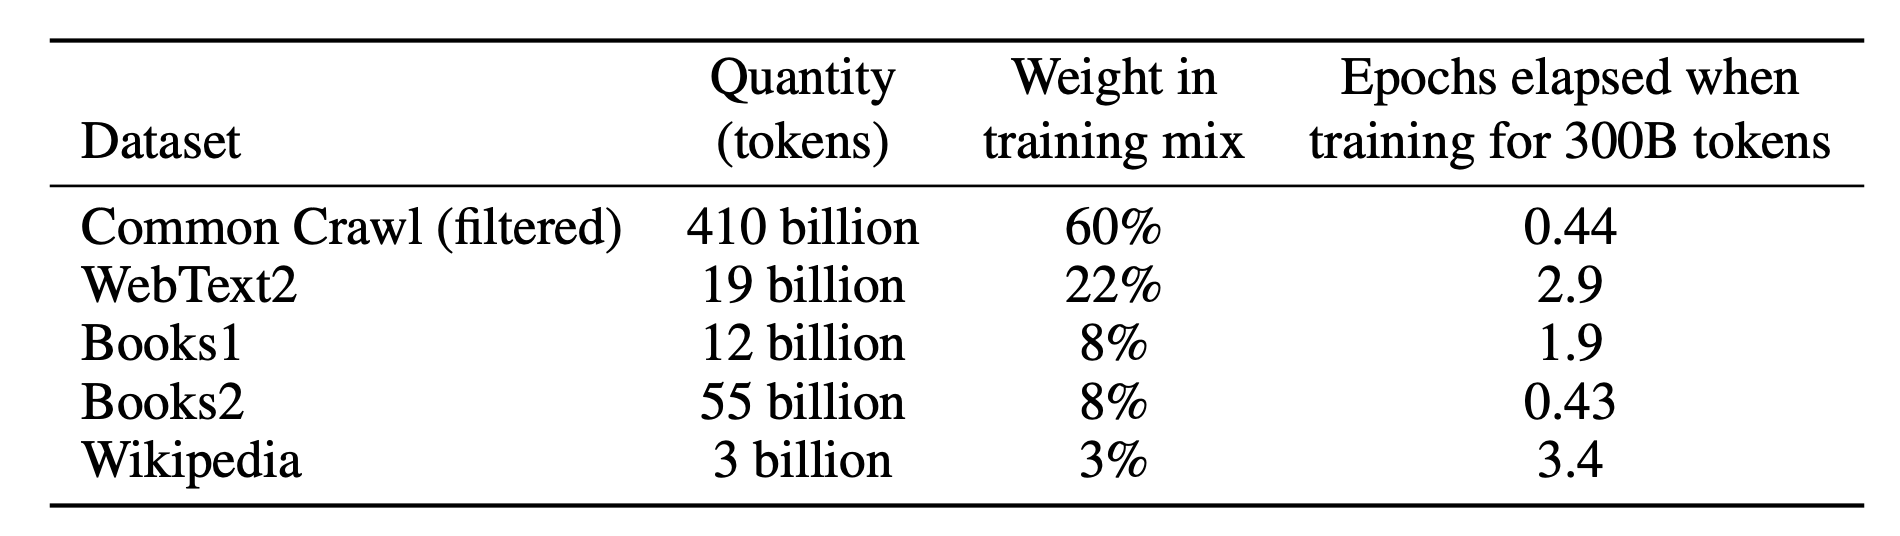 Datasets used to train GPT-3.png